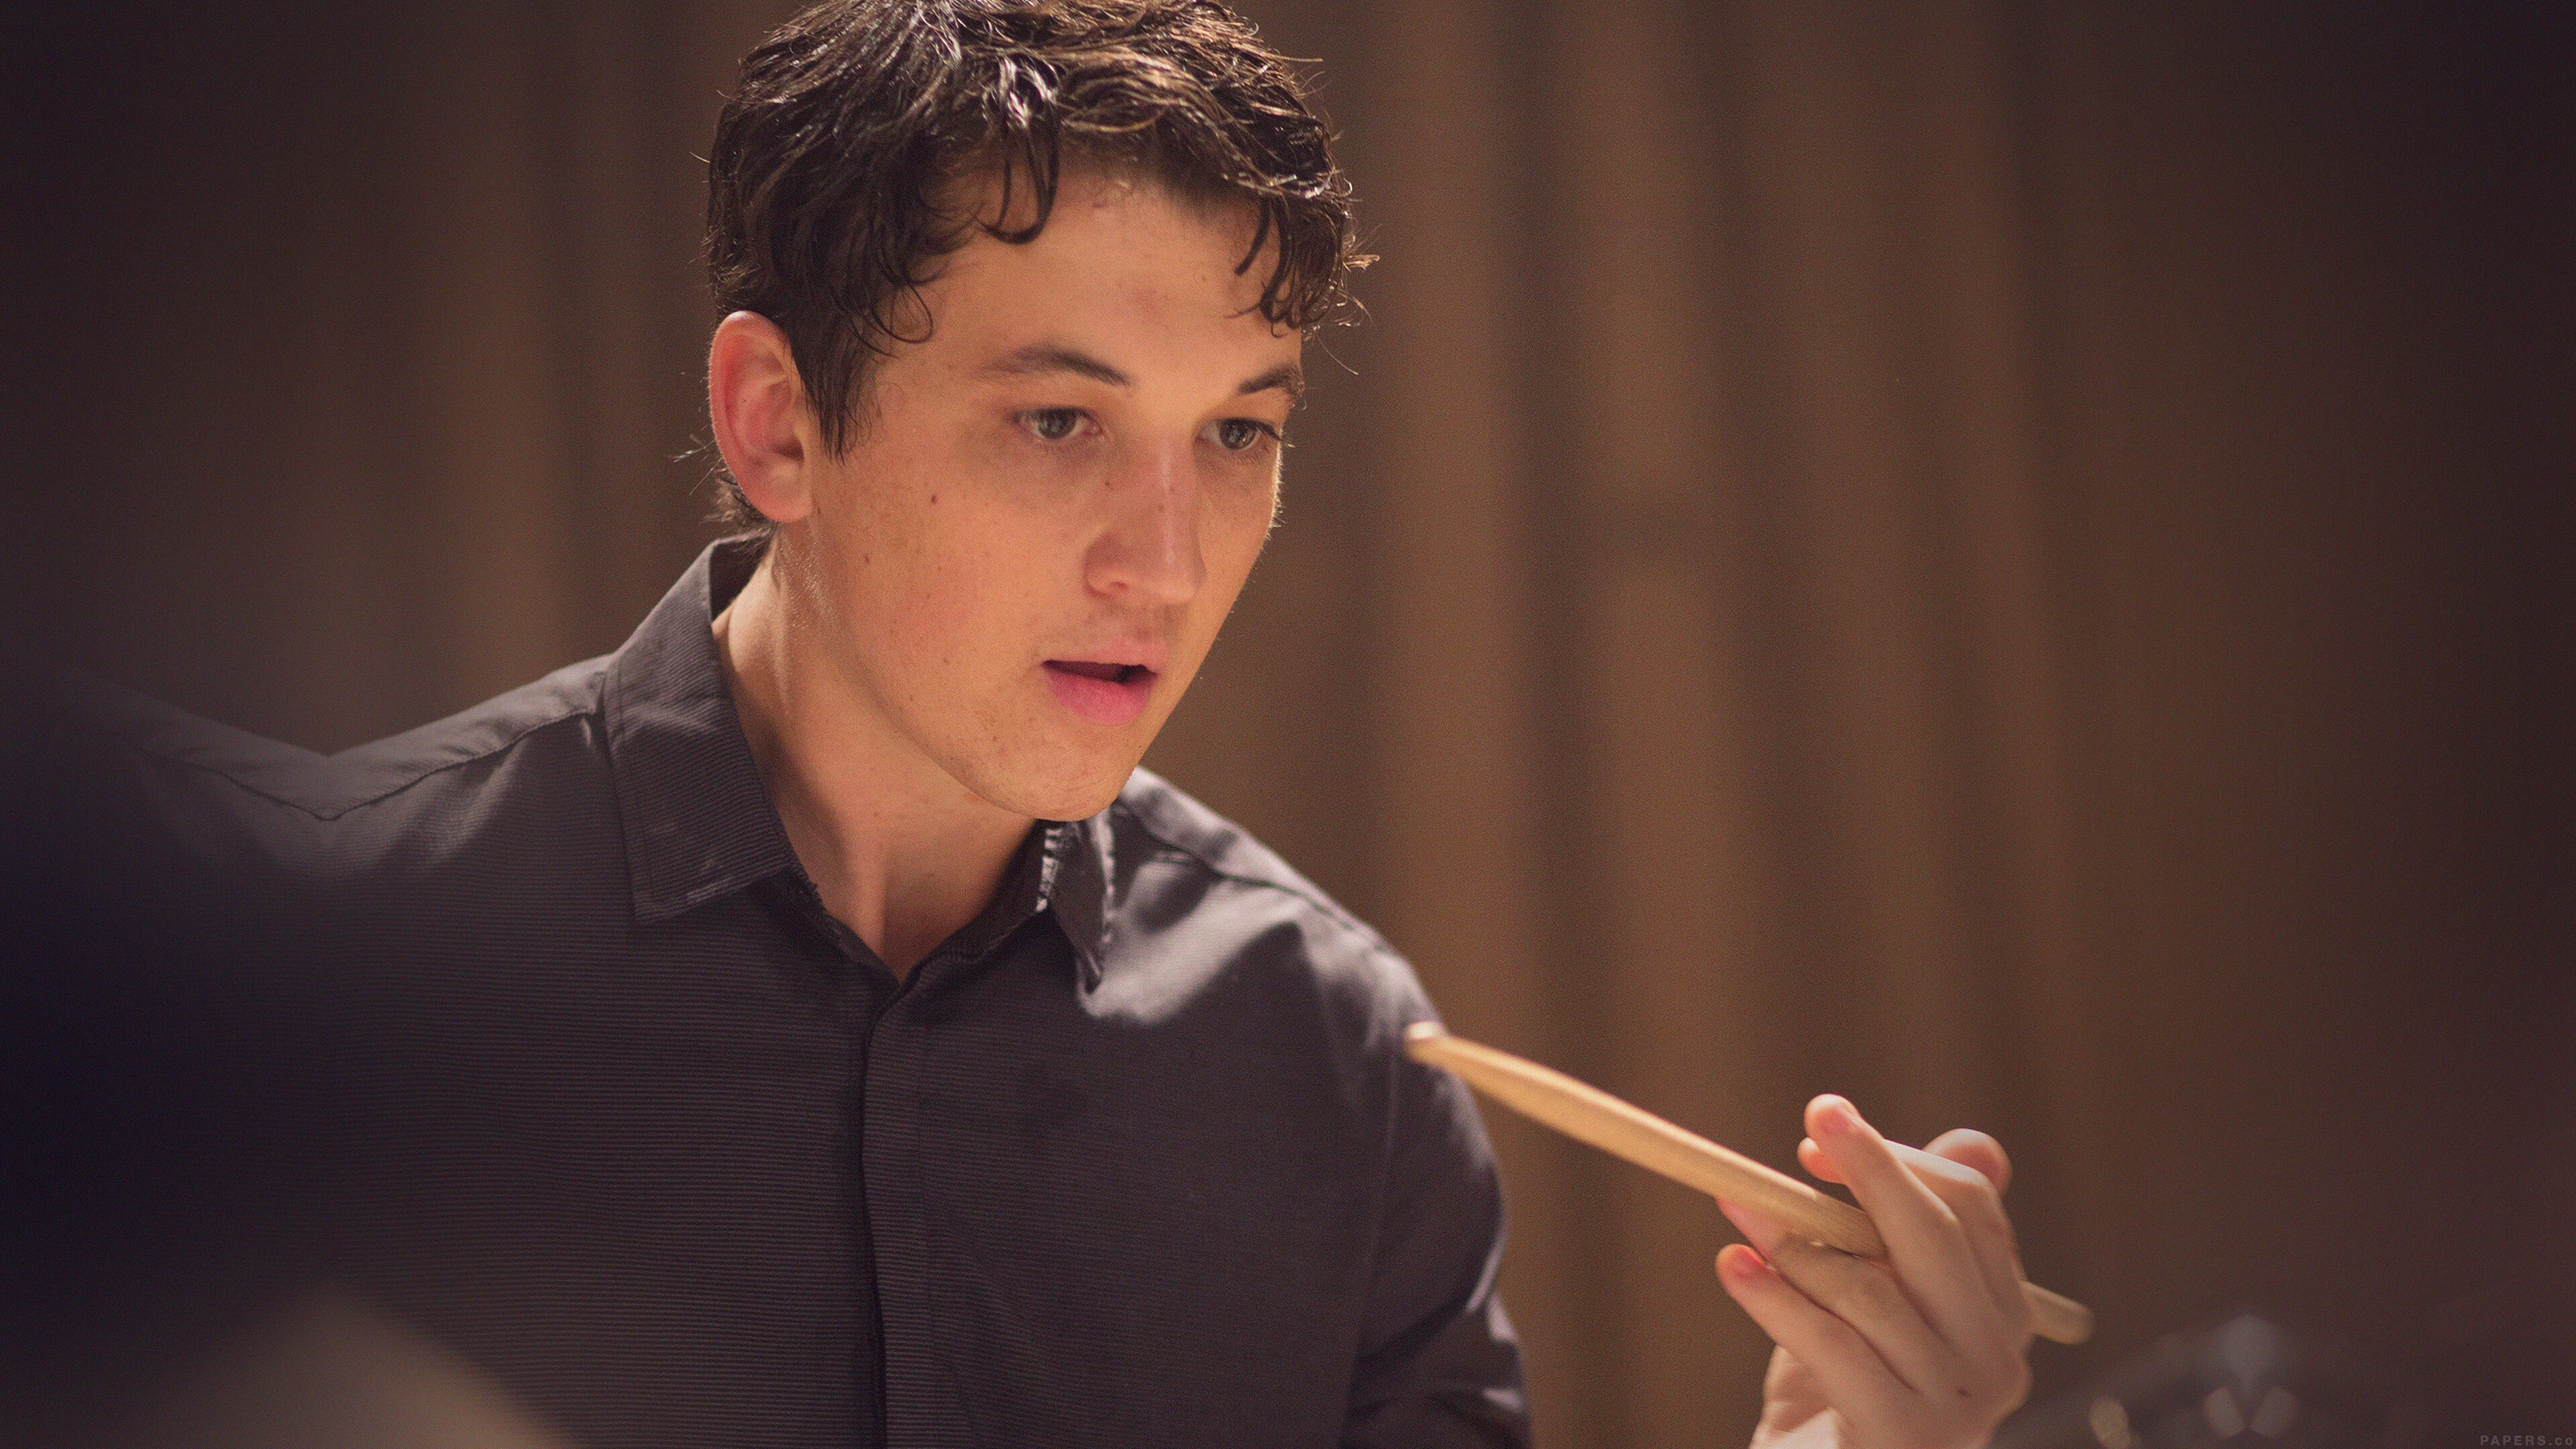 Whiplash: Miles Teller as Andrew Neiman, an ambitious young jazz drummer at Shaffer Conservatory. 3840x2160 4K Background.